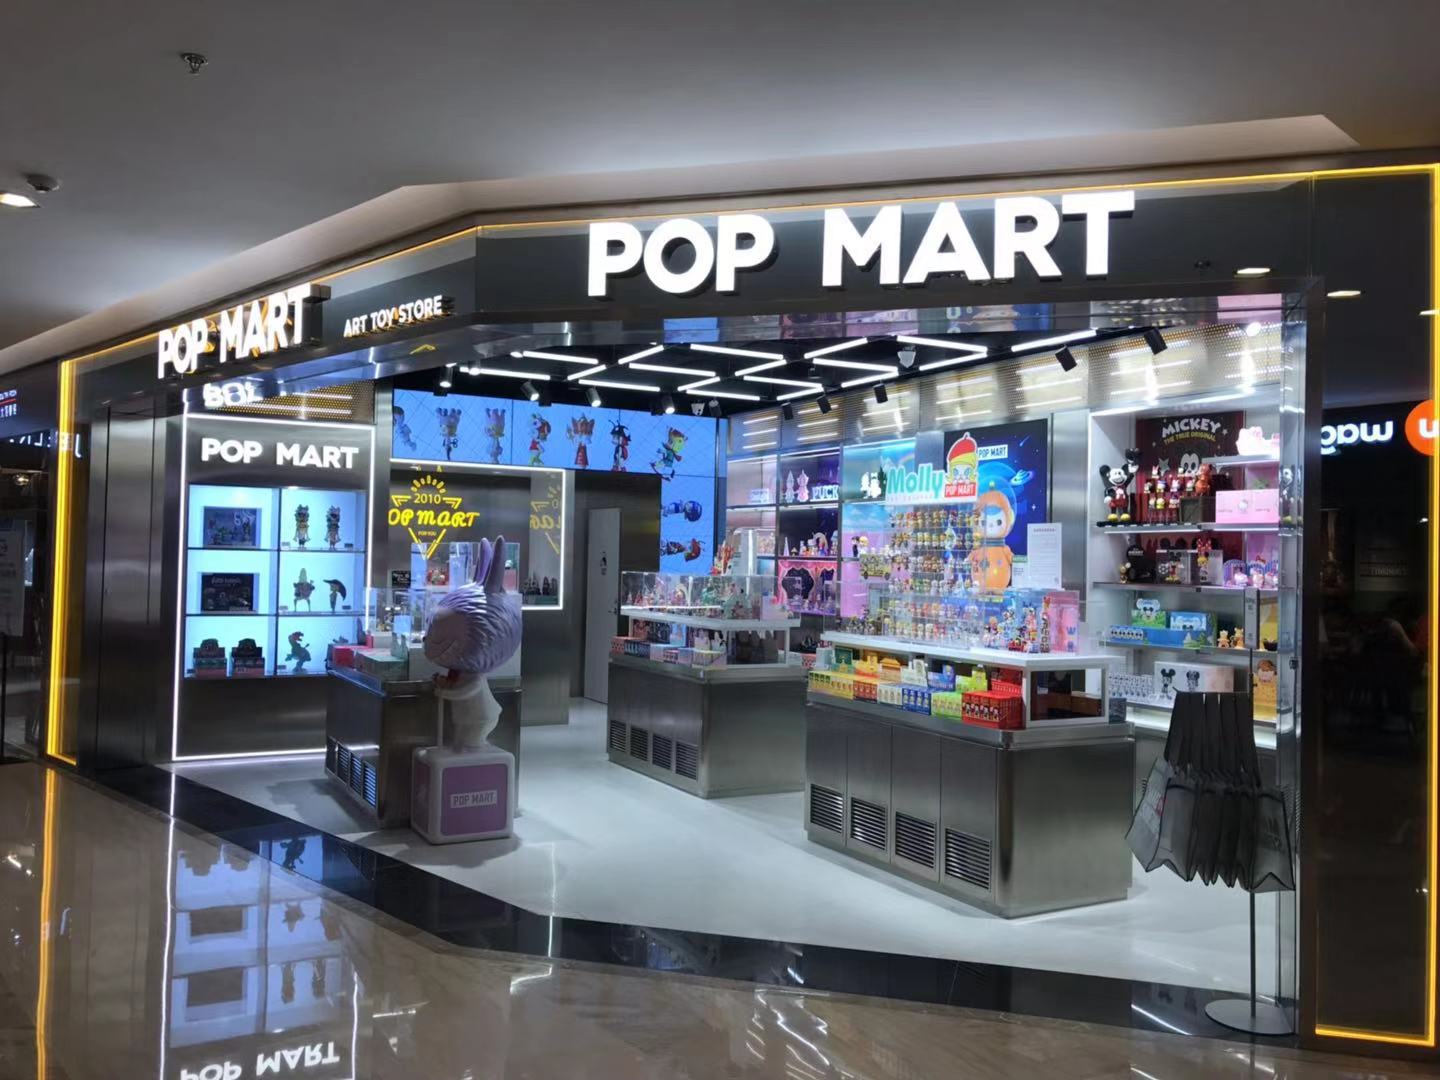 POP MART: Blind box toys show the designer toy market in China is booming | daxue consulting